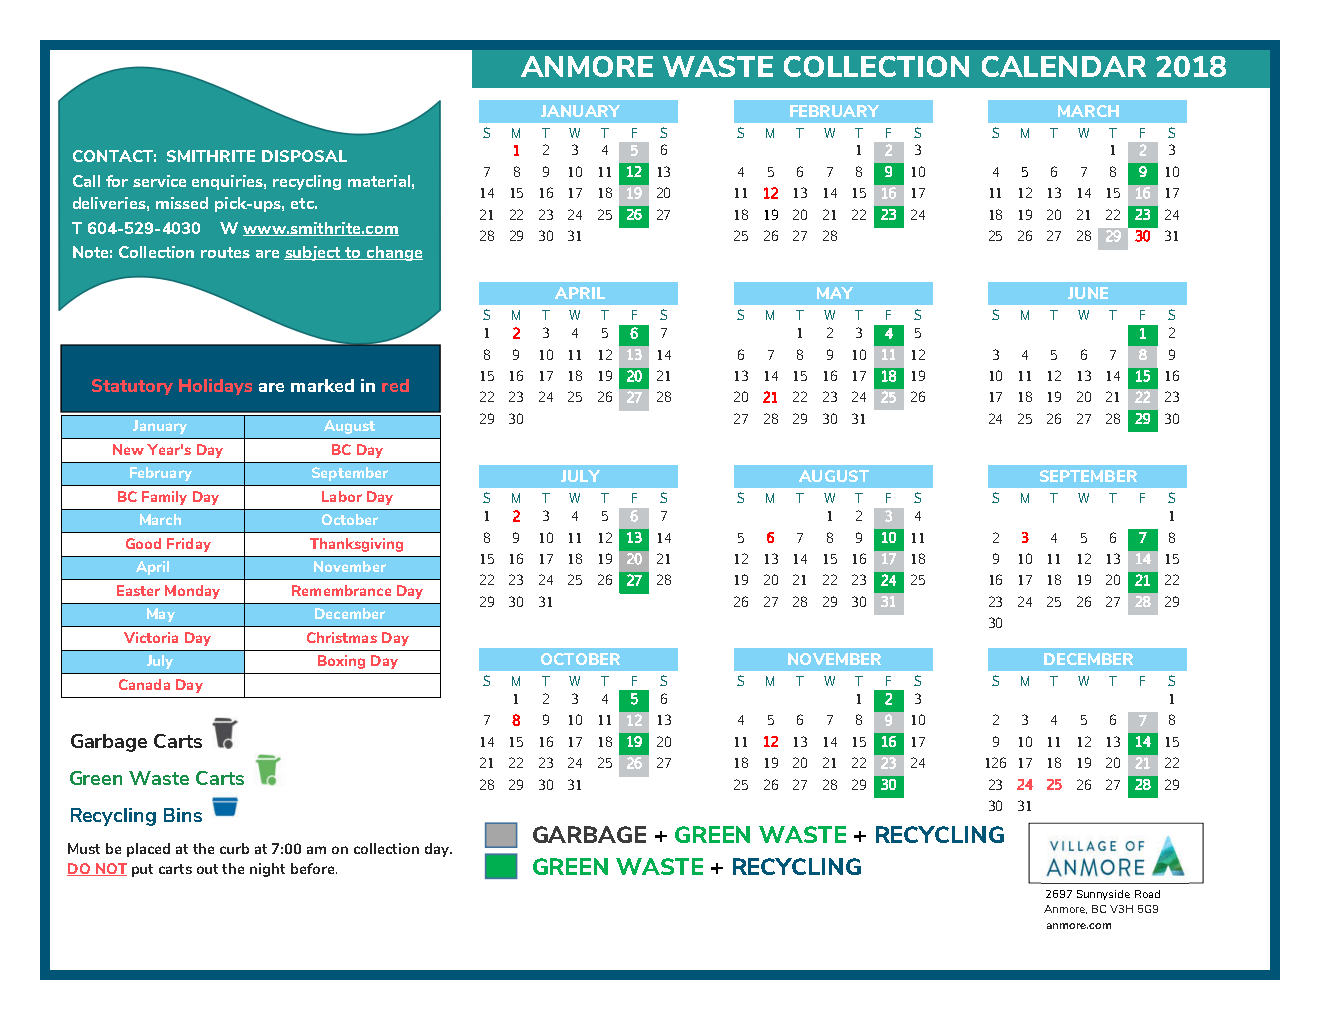 2018 Anmore Waste Collection Calendar FINALjpg_Page1